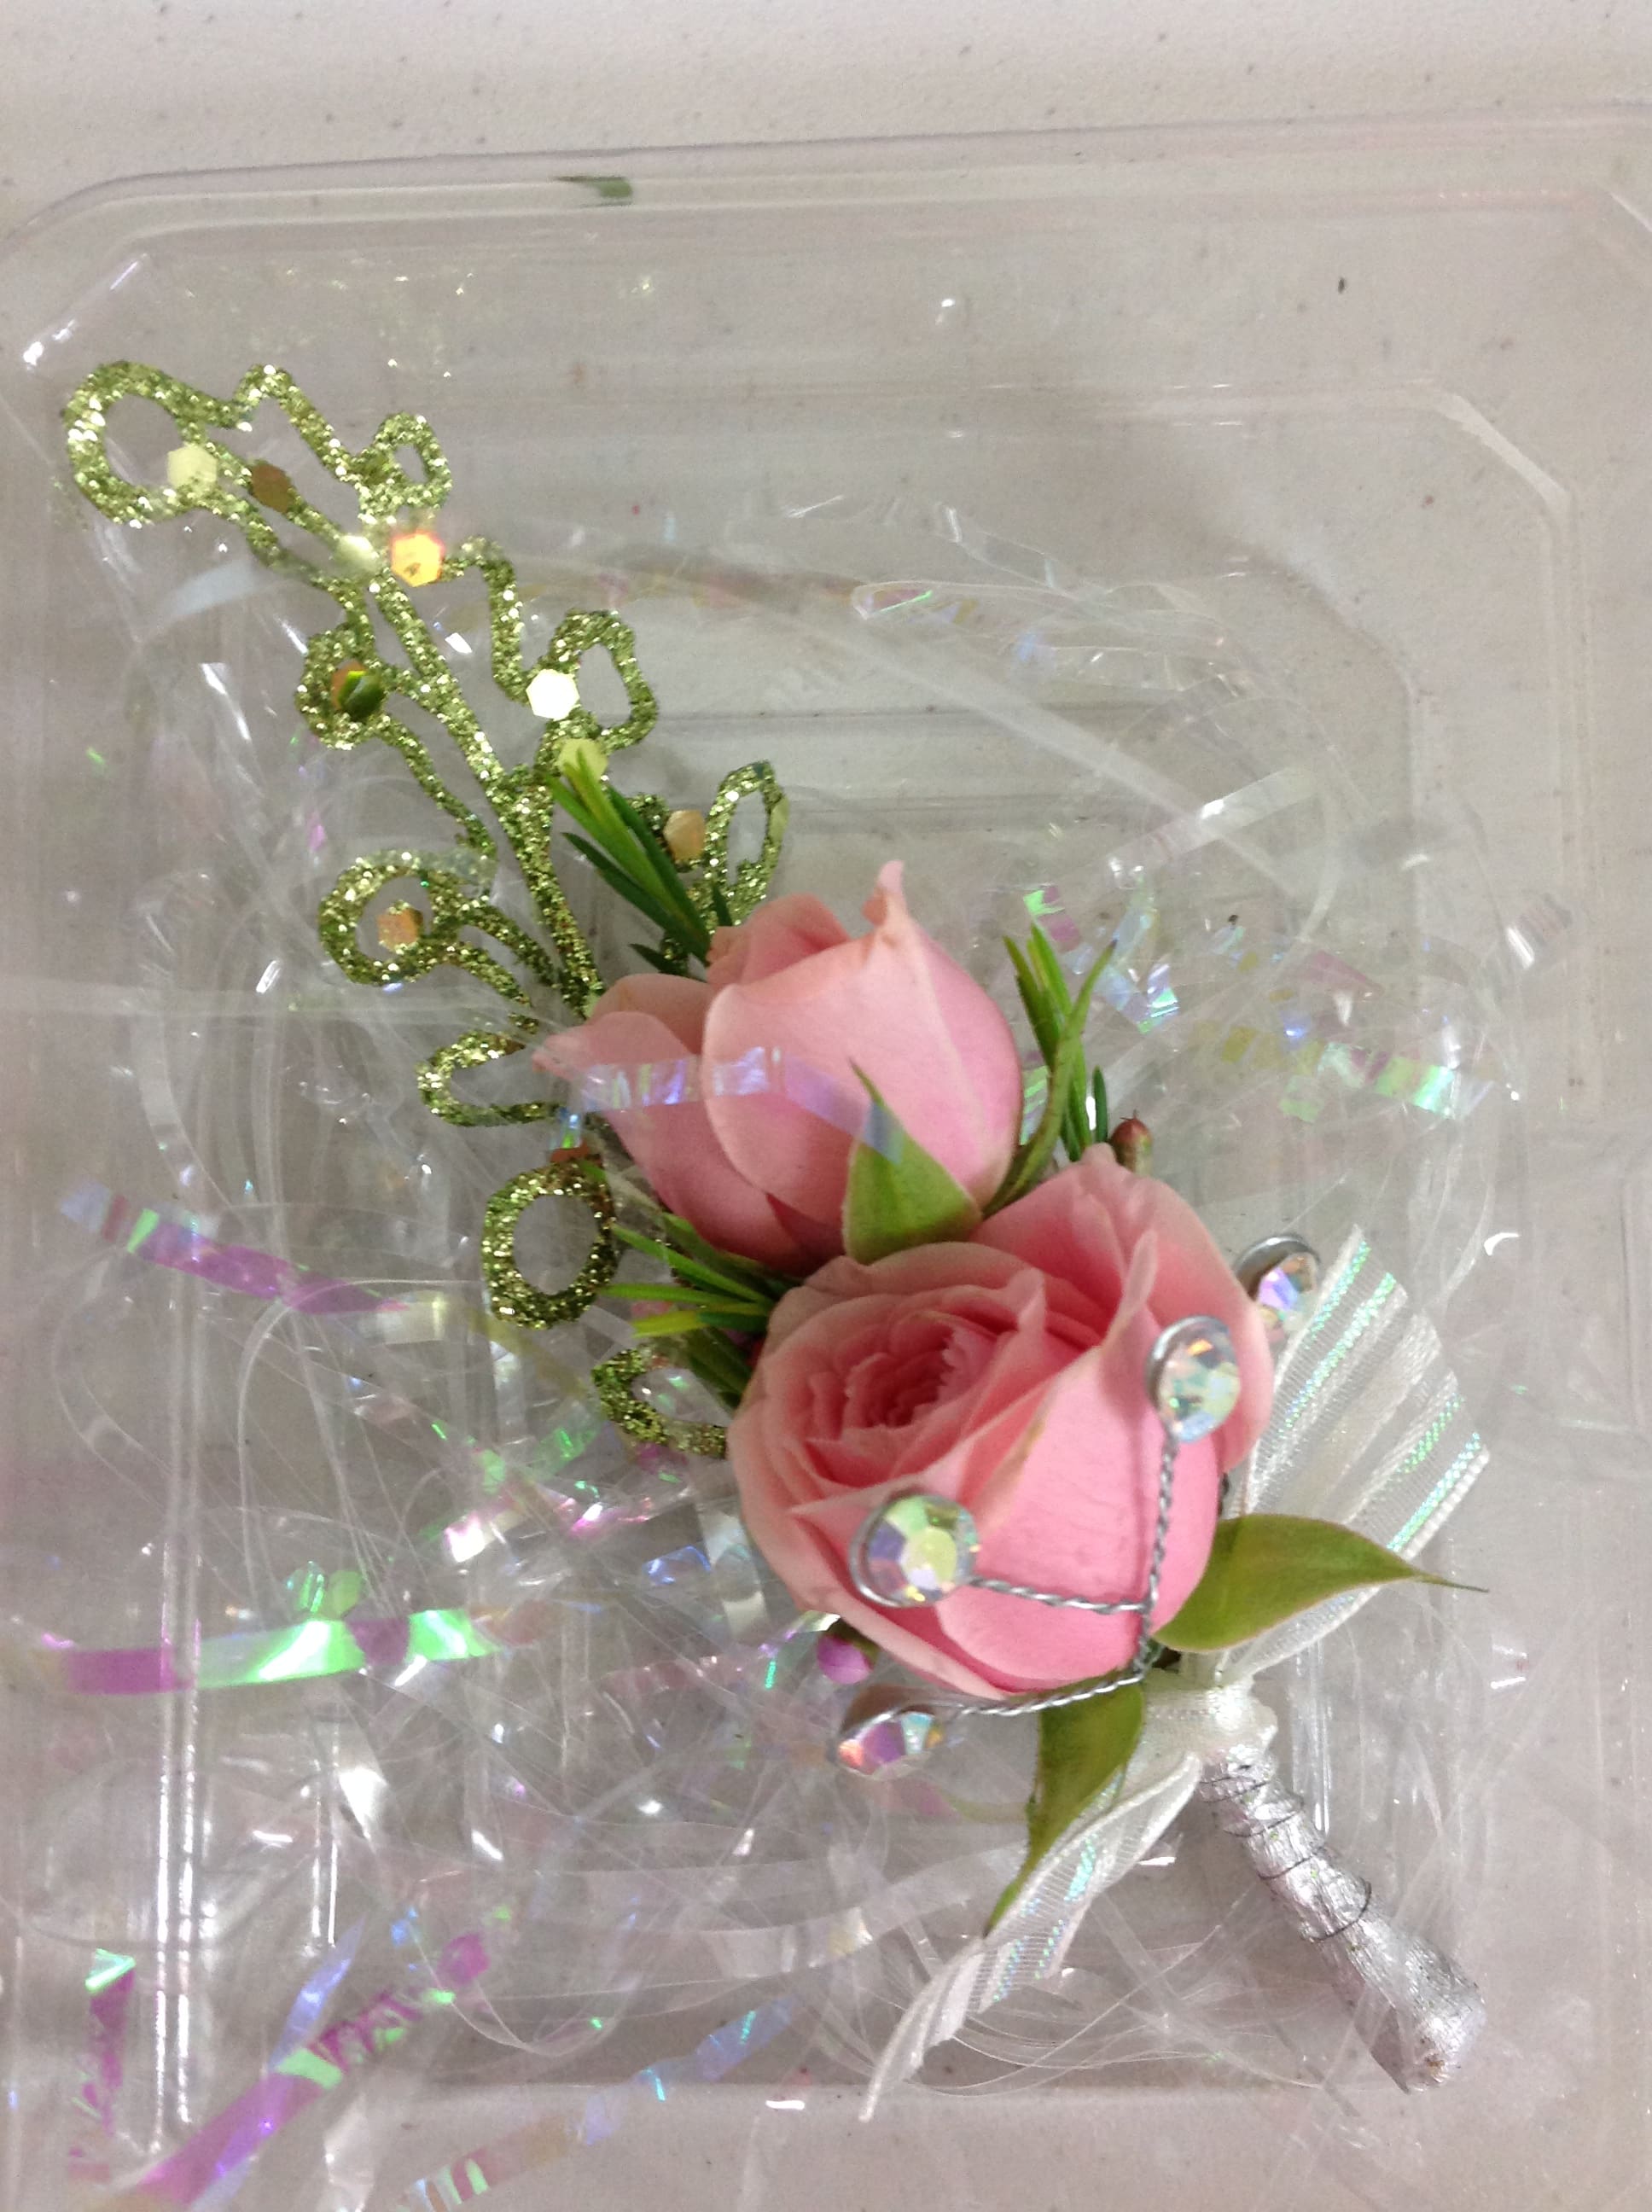 Elegant Rose Boutonniere - Pink Spray Roses with Magnetic Attachment and green sparkle leaf makes this boutonniere a perfect show stopper for your occasion.  This can be made in any color.  Please specify if you wish to have this made in another color scheme.